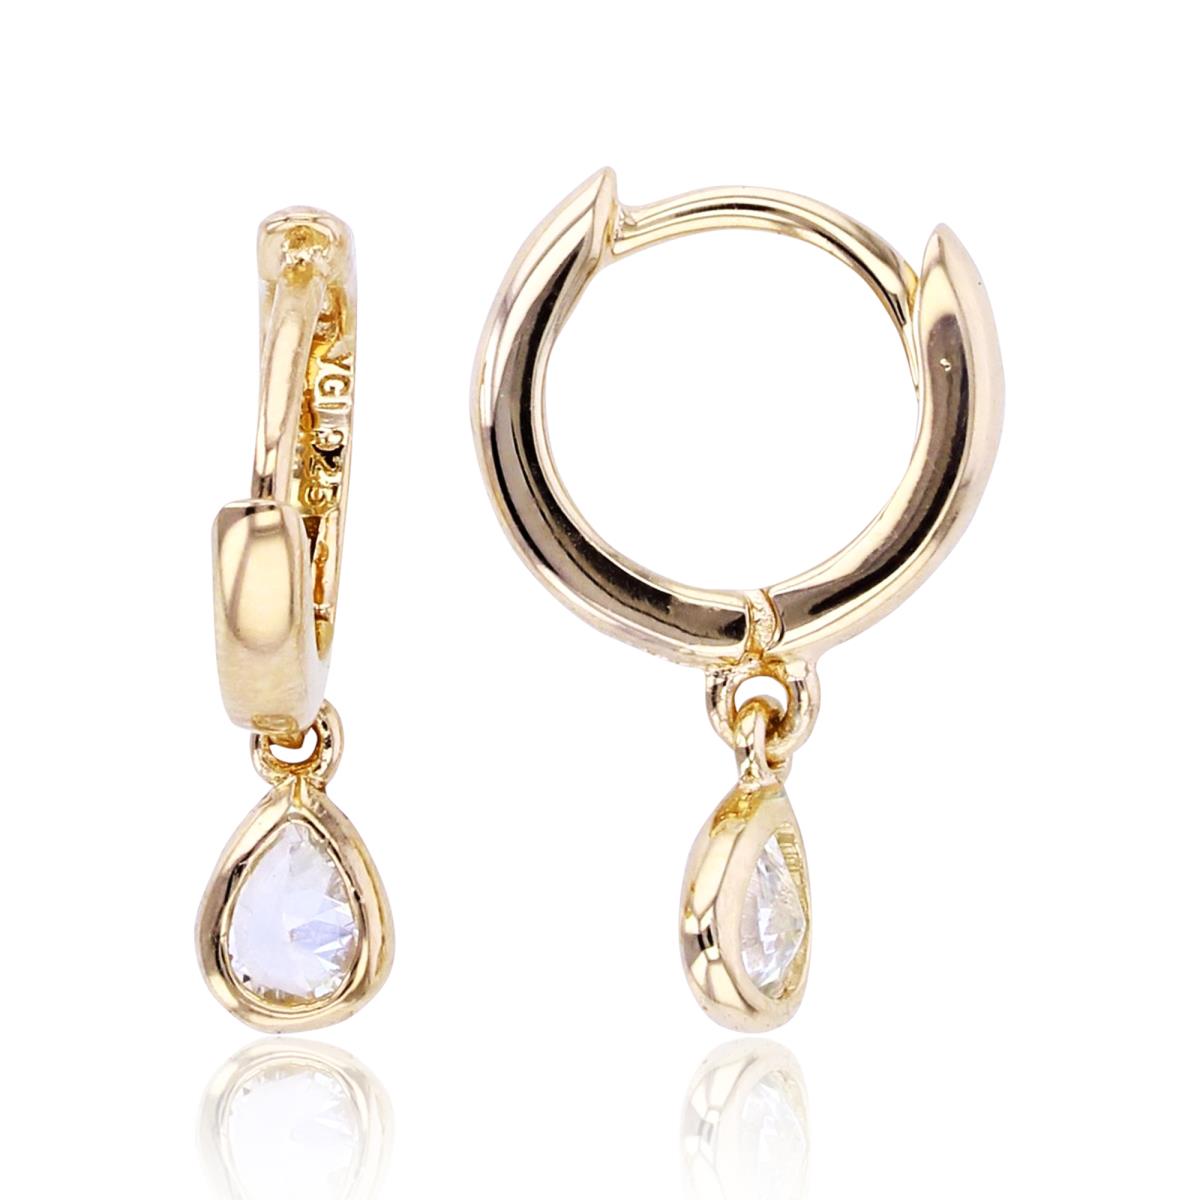 Sterling Silver+1Micron Yellow Gold 4x3mm PS White CZ Drop Dangling on Huggie Top Earrings